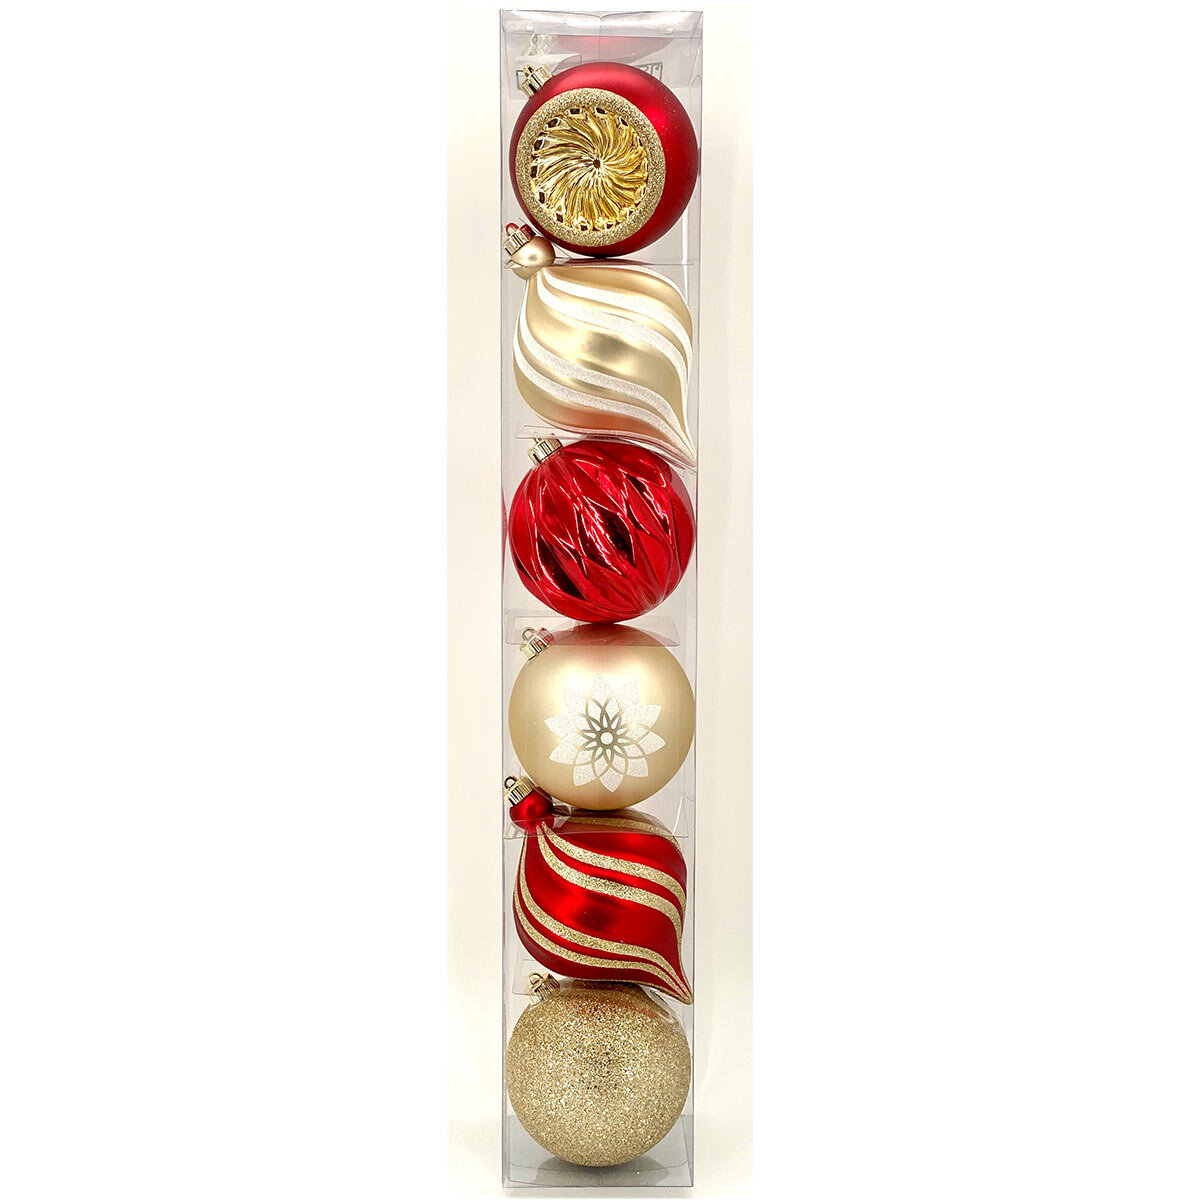 6 Inch (15cm) Shatter-Resistant Christmas Ornaments Set of 6 - in 2 Colours